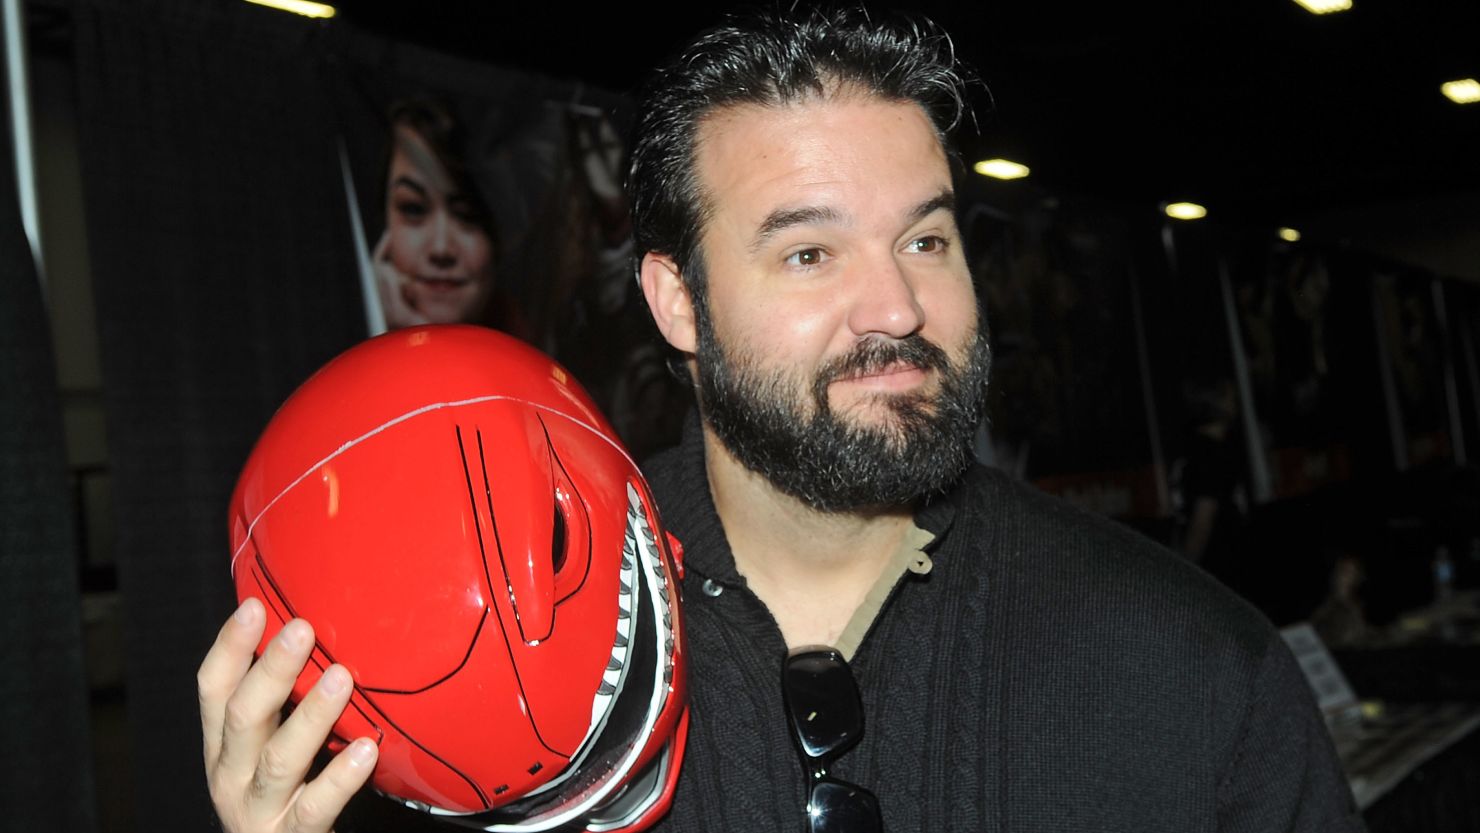 Jason Geiger, also known as Austin St. John, photographed at a convention in 2015.  